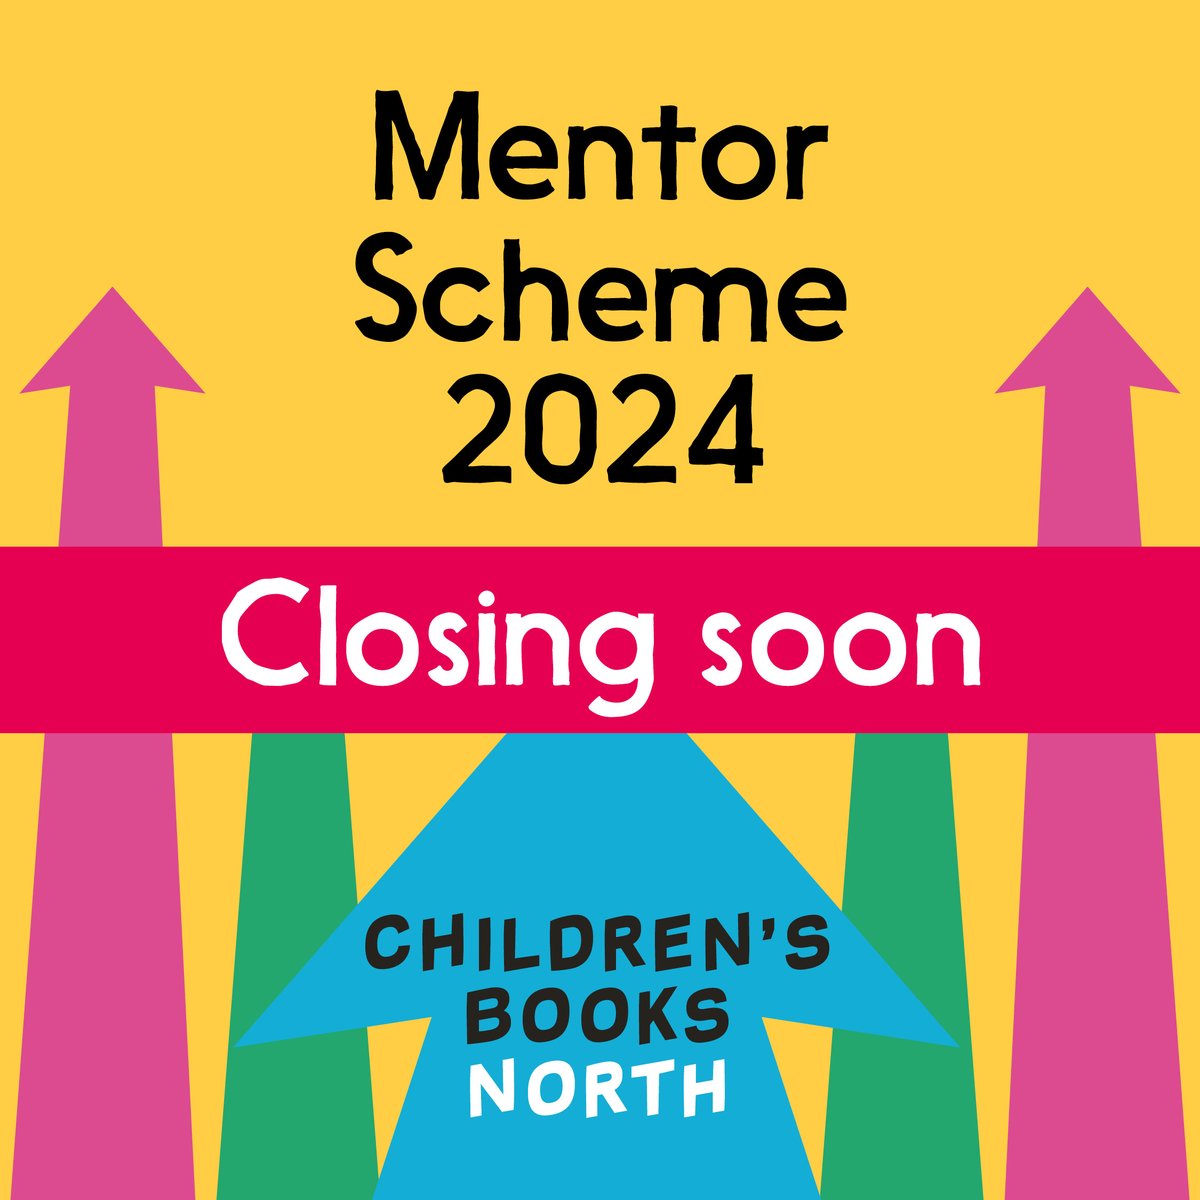 There are just five days left to apply for the Children's Books North Mentoring Scheme! If you are based in the North of England or Scotland and interested in a career in publishing and would benefit from advice from industry professionals, you should apply!